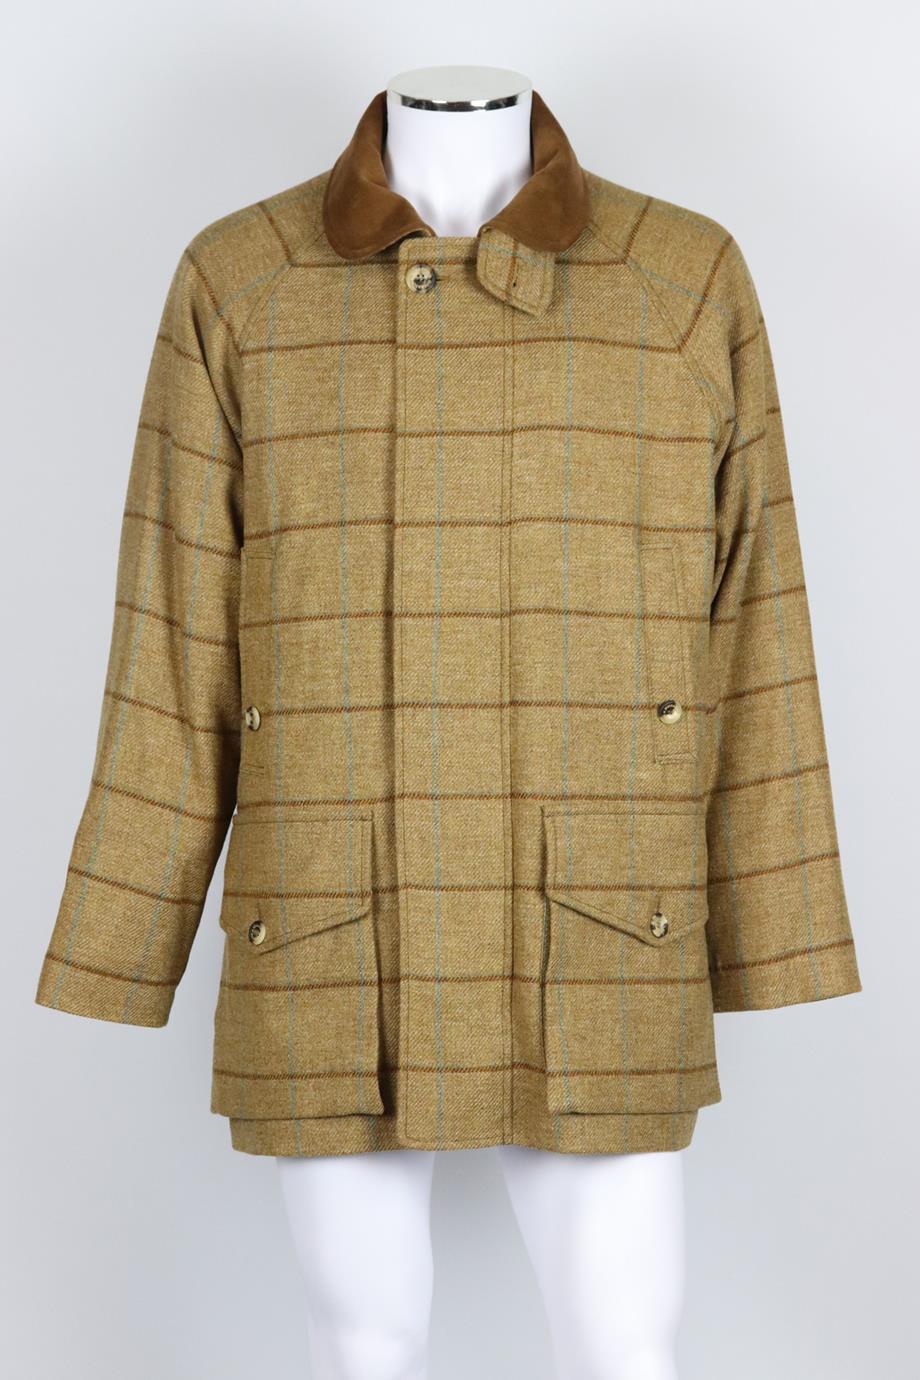 Holland & Holland men's checked wool blend tweed coat. Tan, brown and blue. Long sleeve, crewneck. Zip and button fastening at front. 100% Wool; lining: 100% cotton; filling: 100% polyurethane. Size: Medium (IT 48, EU 48, UK/US Chest 38). Shoulder